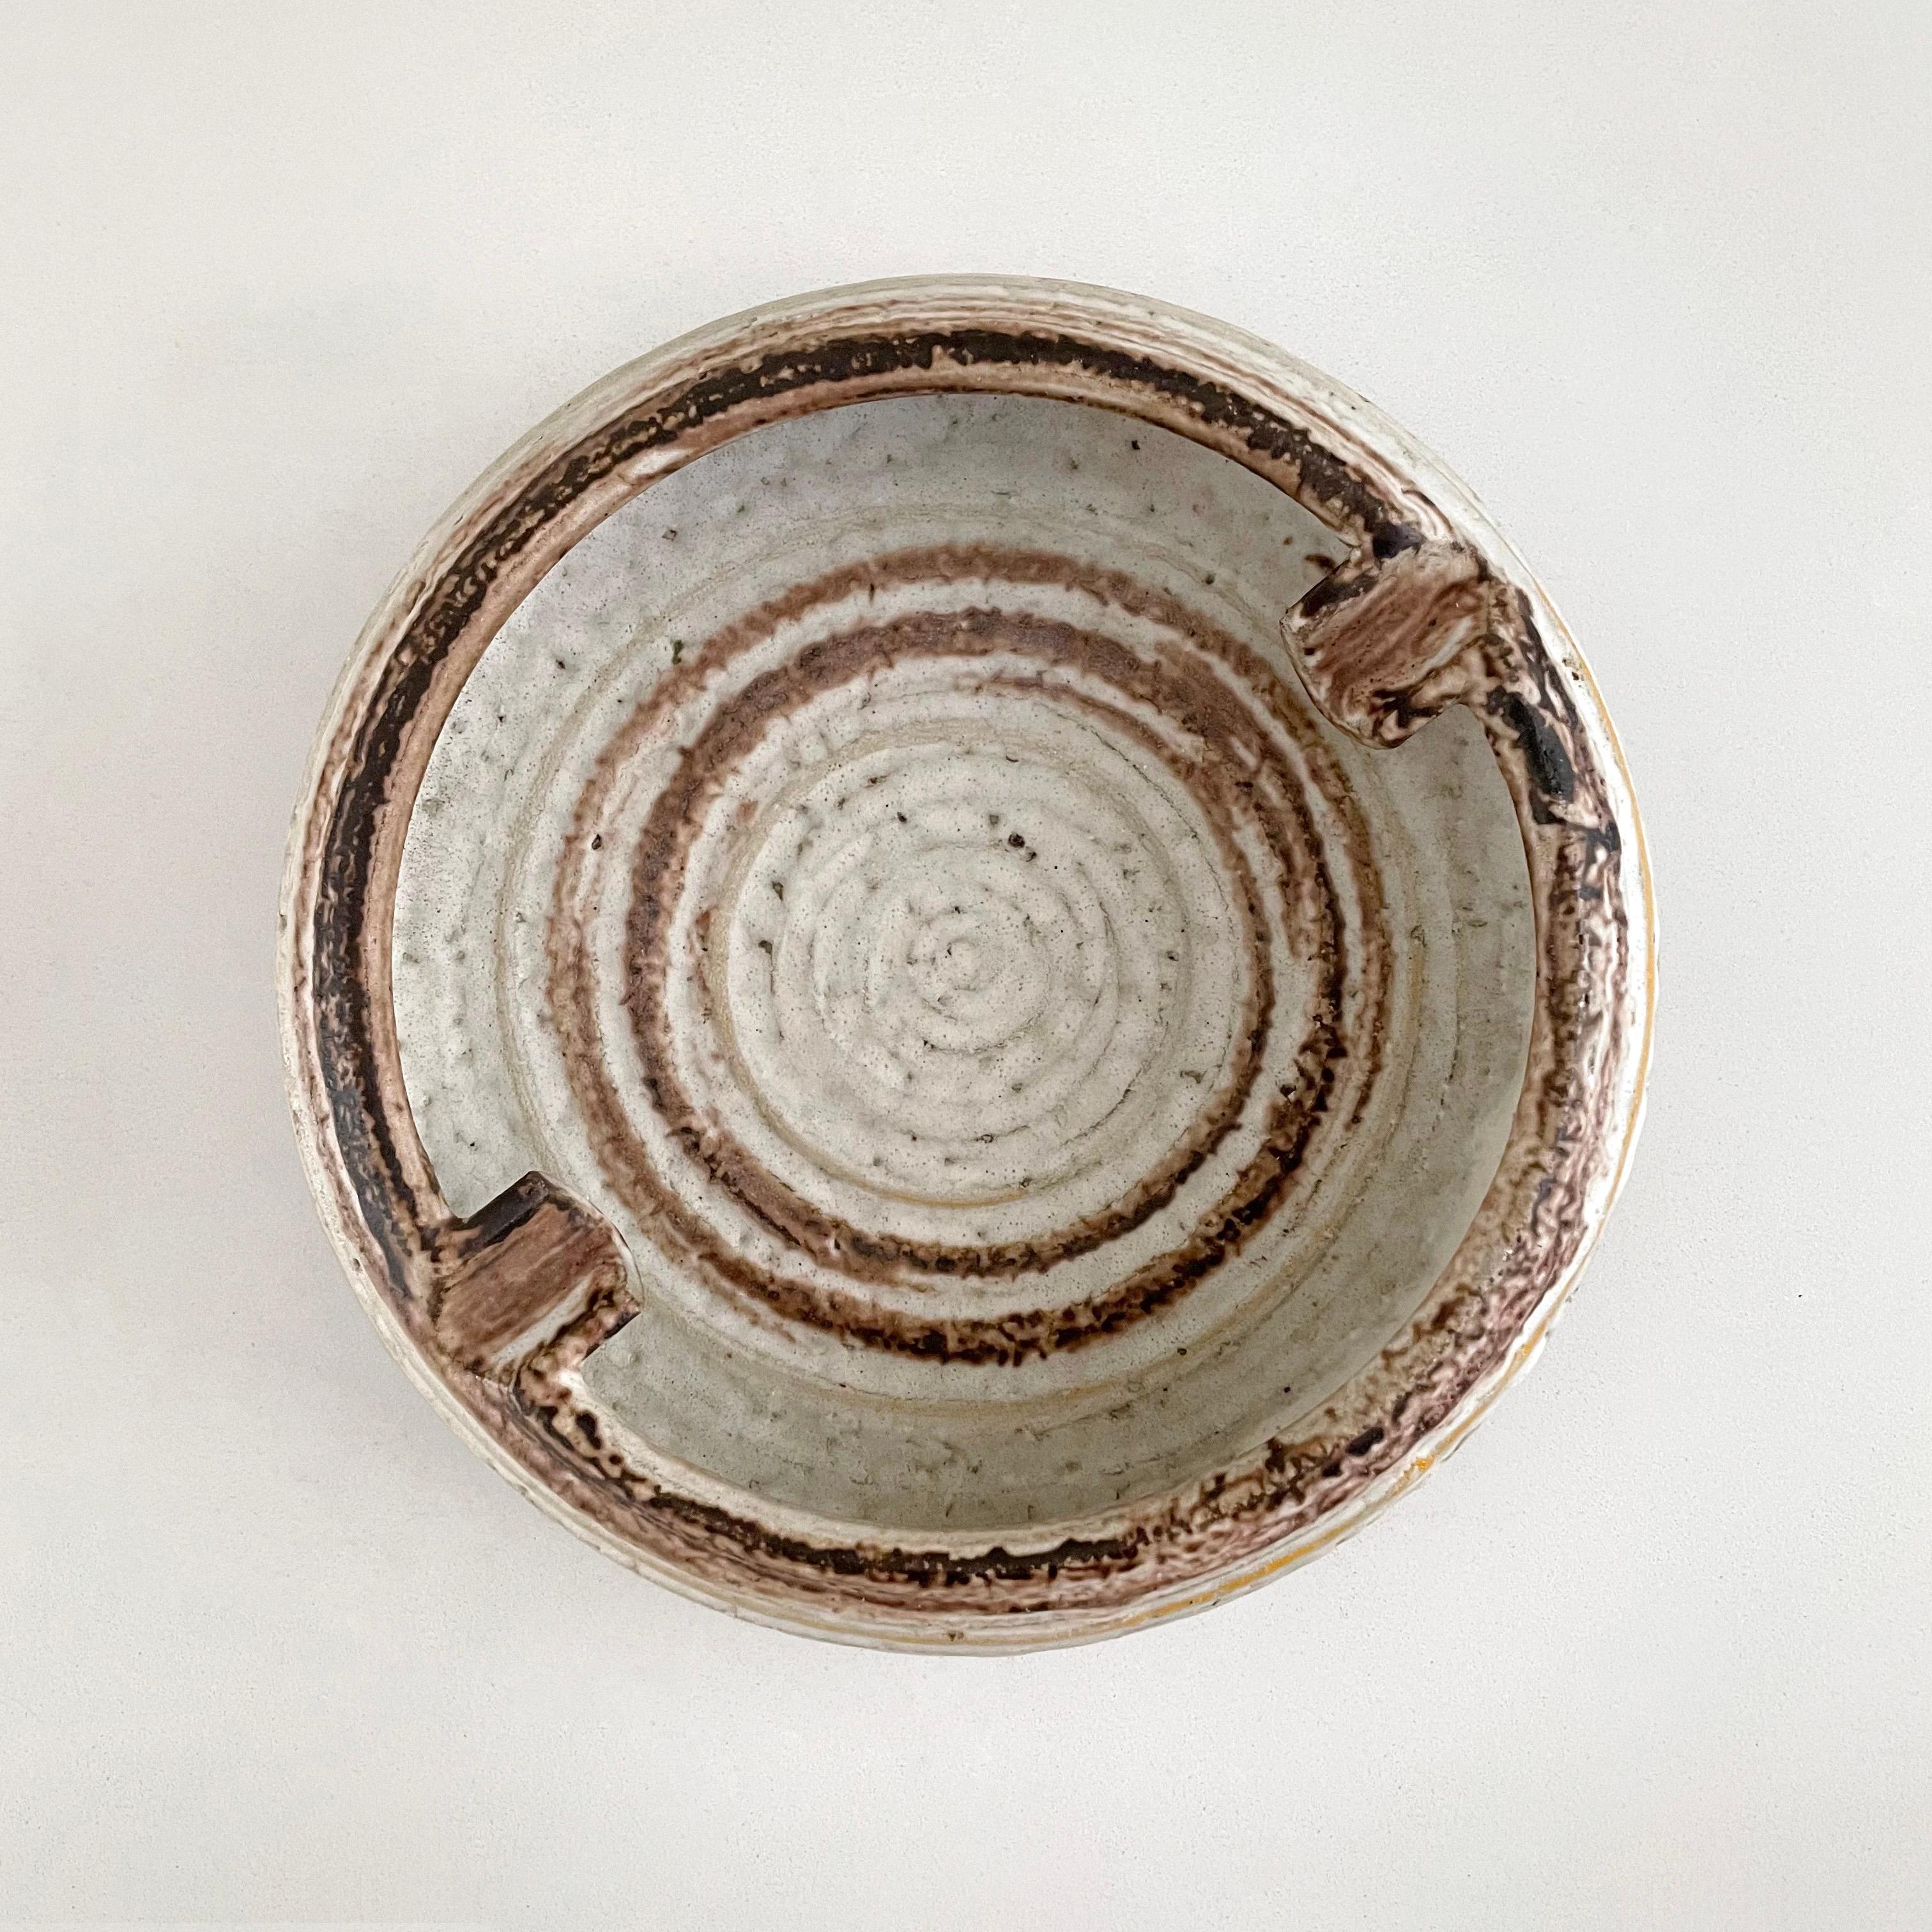 Rosenthal Netter ceramic ashtray catch all
Italy, circa 1970’s 
Organic composition and feel 
Neutral tones 
Marked identification 
Three sizes available, each sold separately
Last photo is for size reference only.